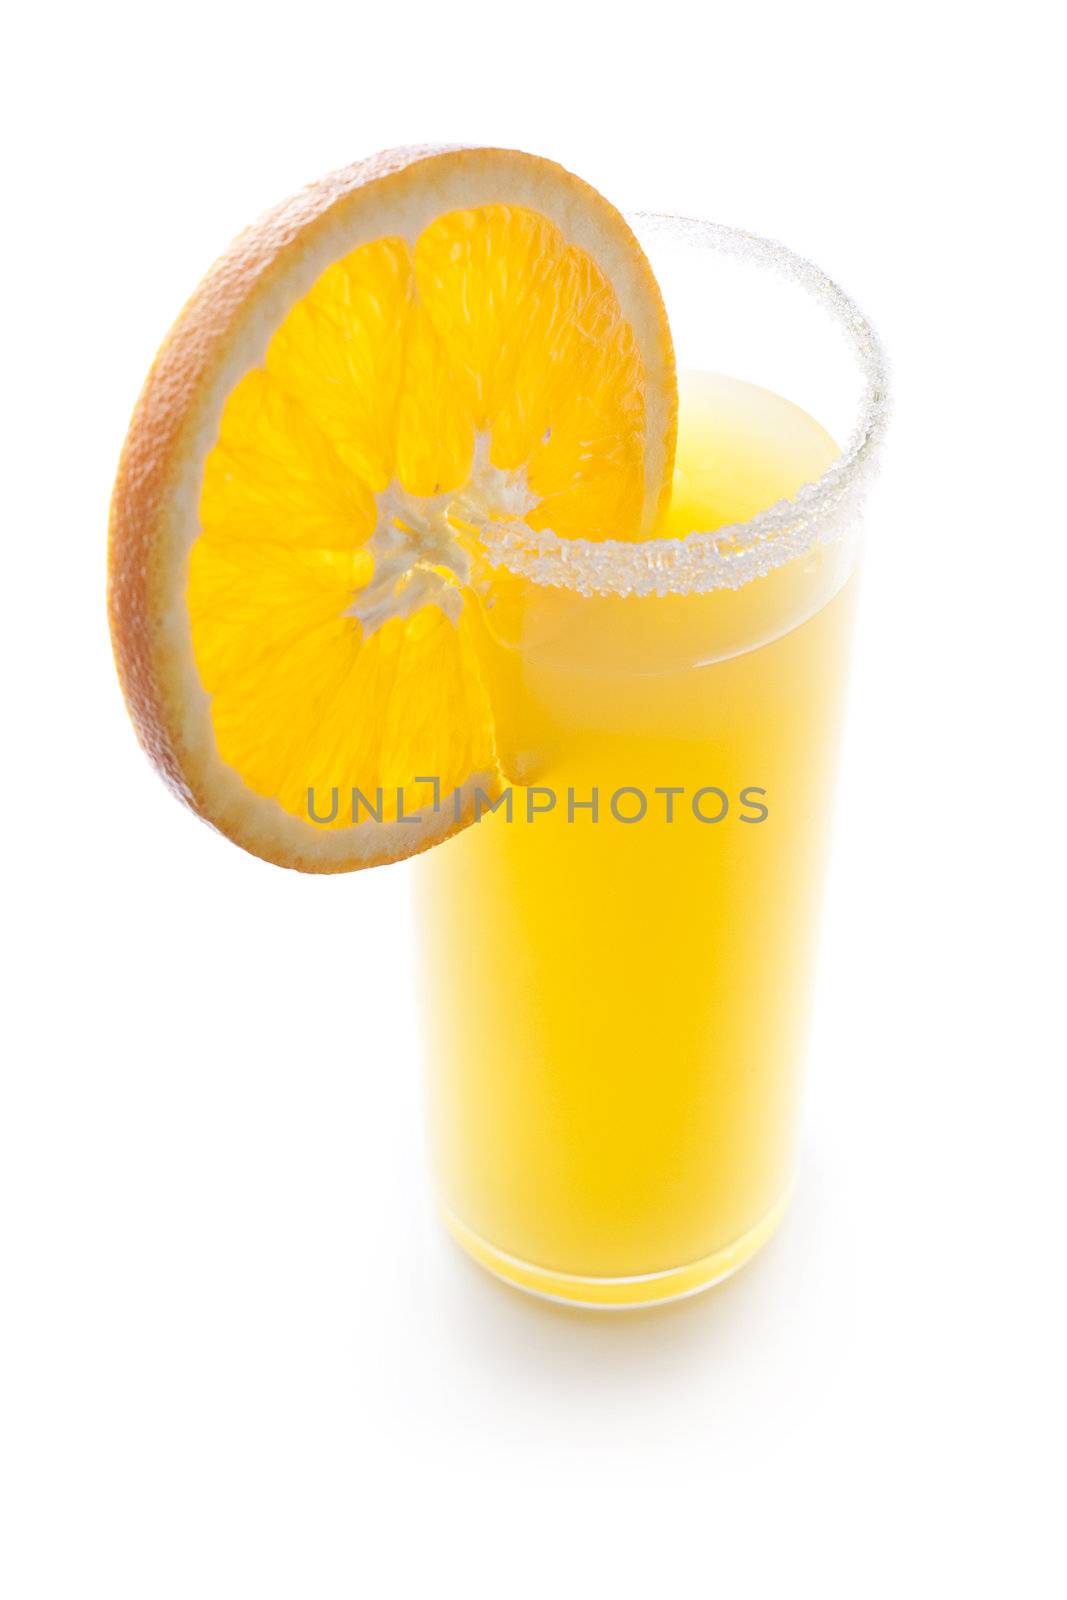 Cocktail with a slice of orange isolated on white